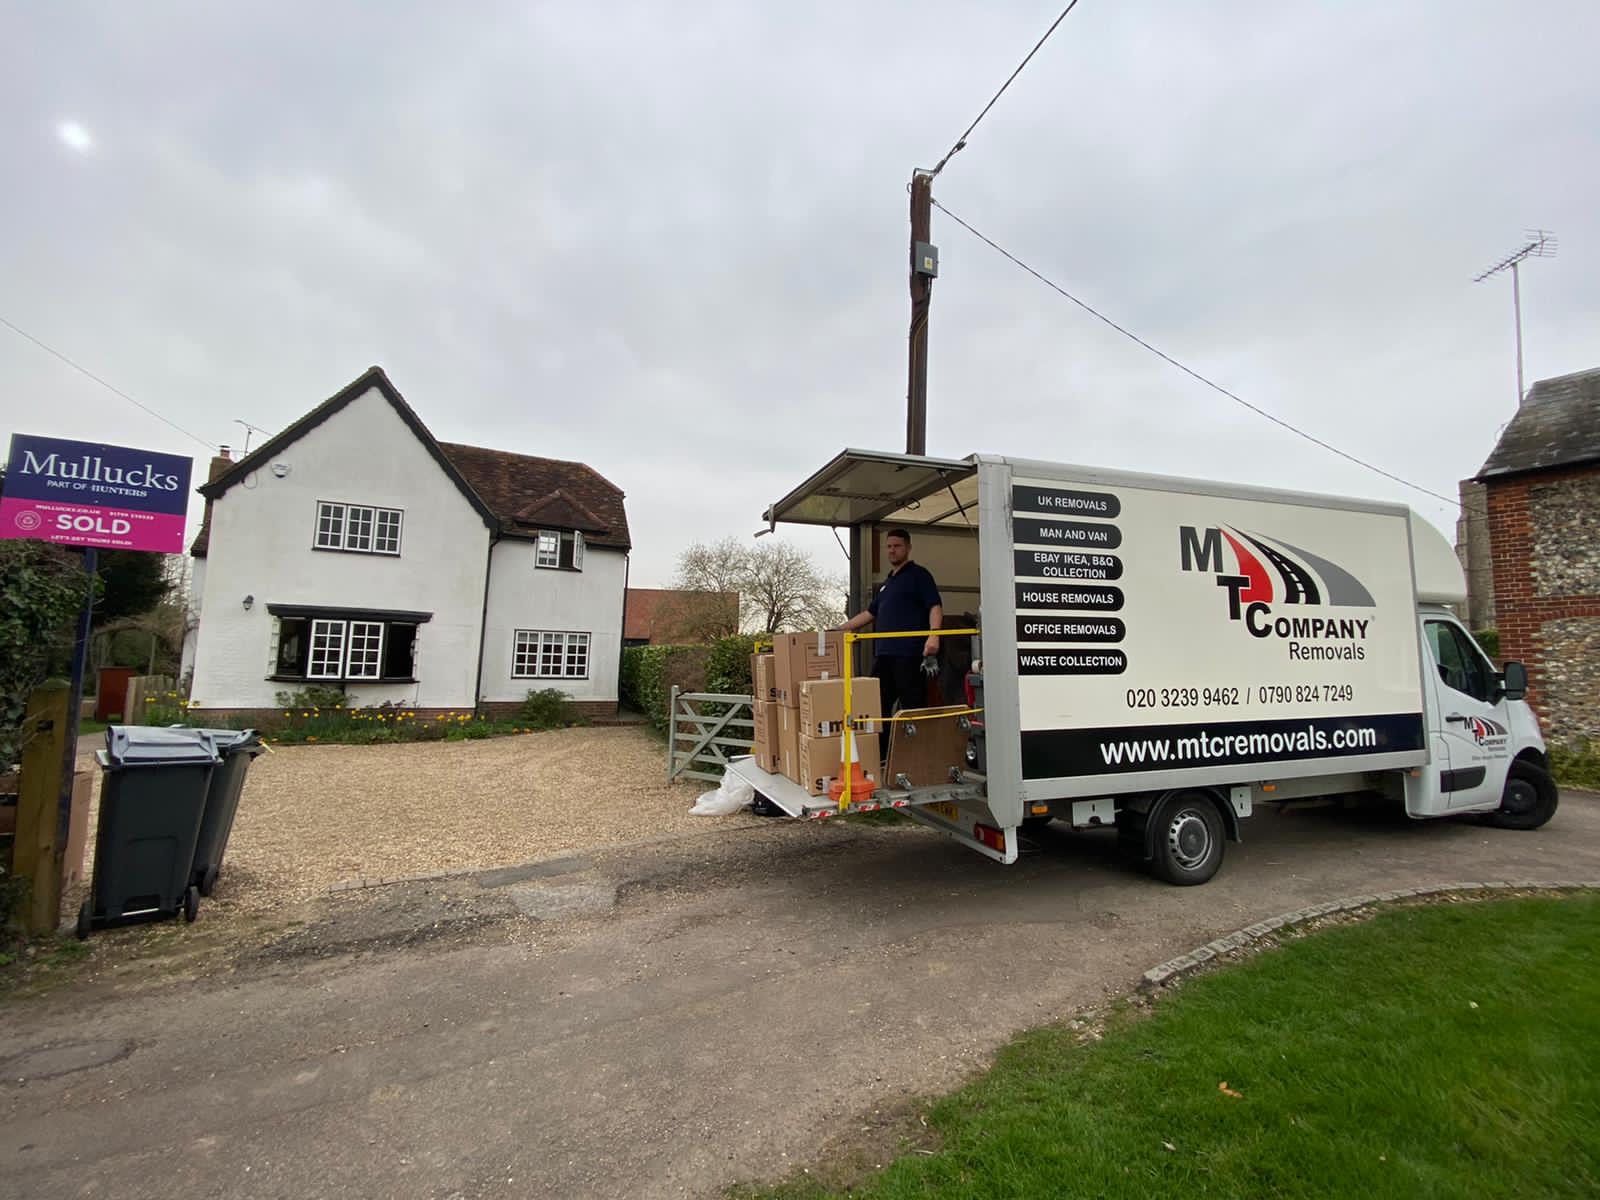 Large Moving Box - London Removals Company | MTC Removals